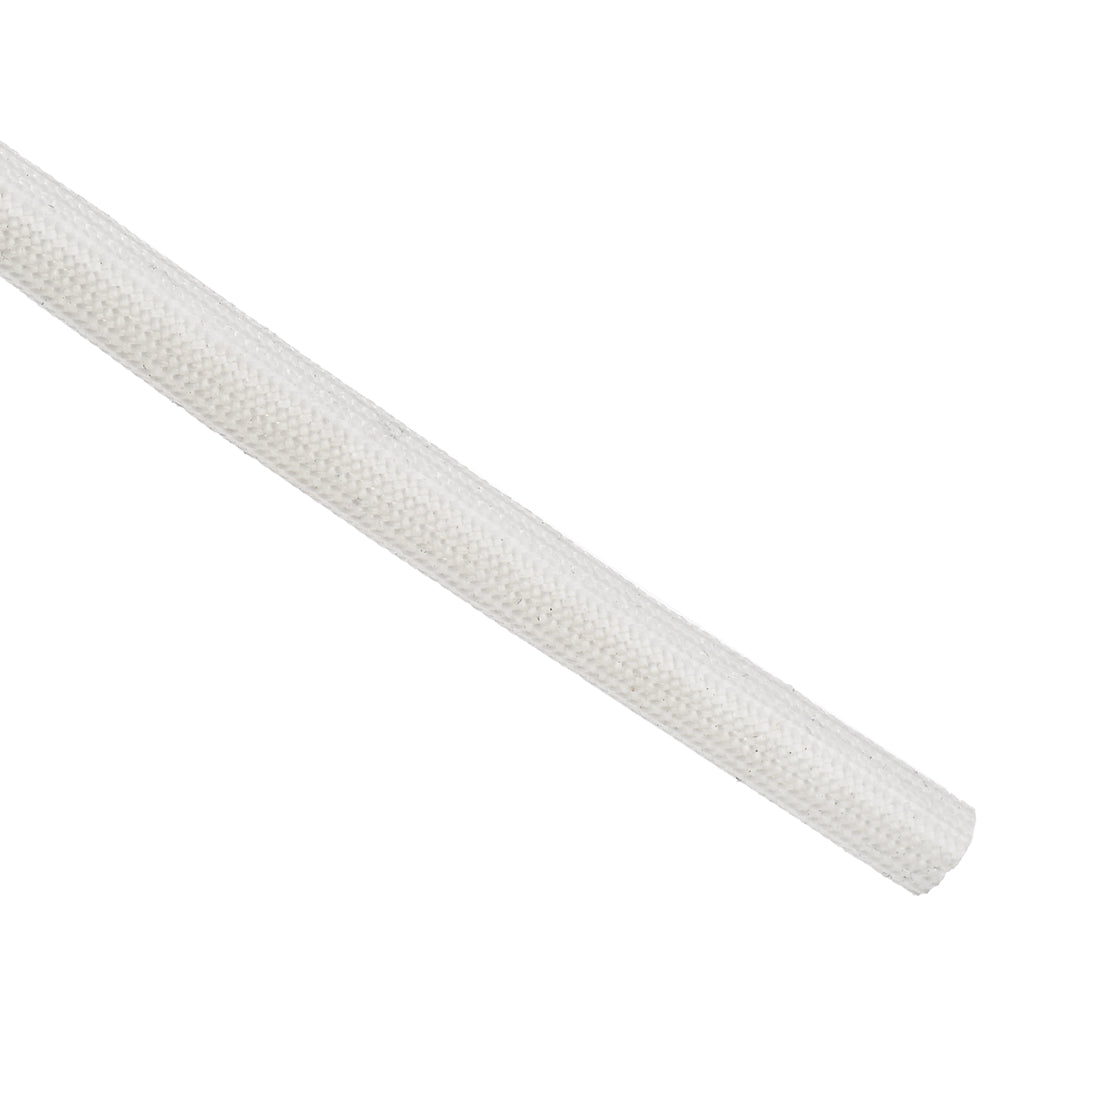 uxcell Uxcell Insulation Cable Protector,16.4Ft-7mm High TEMP Silicone Fiberglass Sleeve White